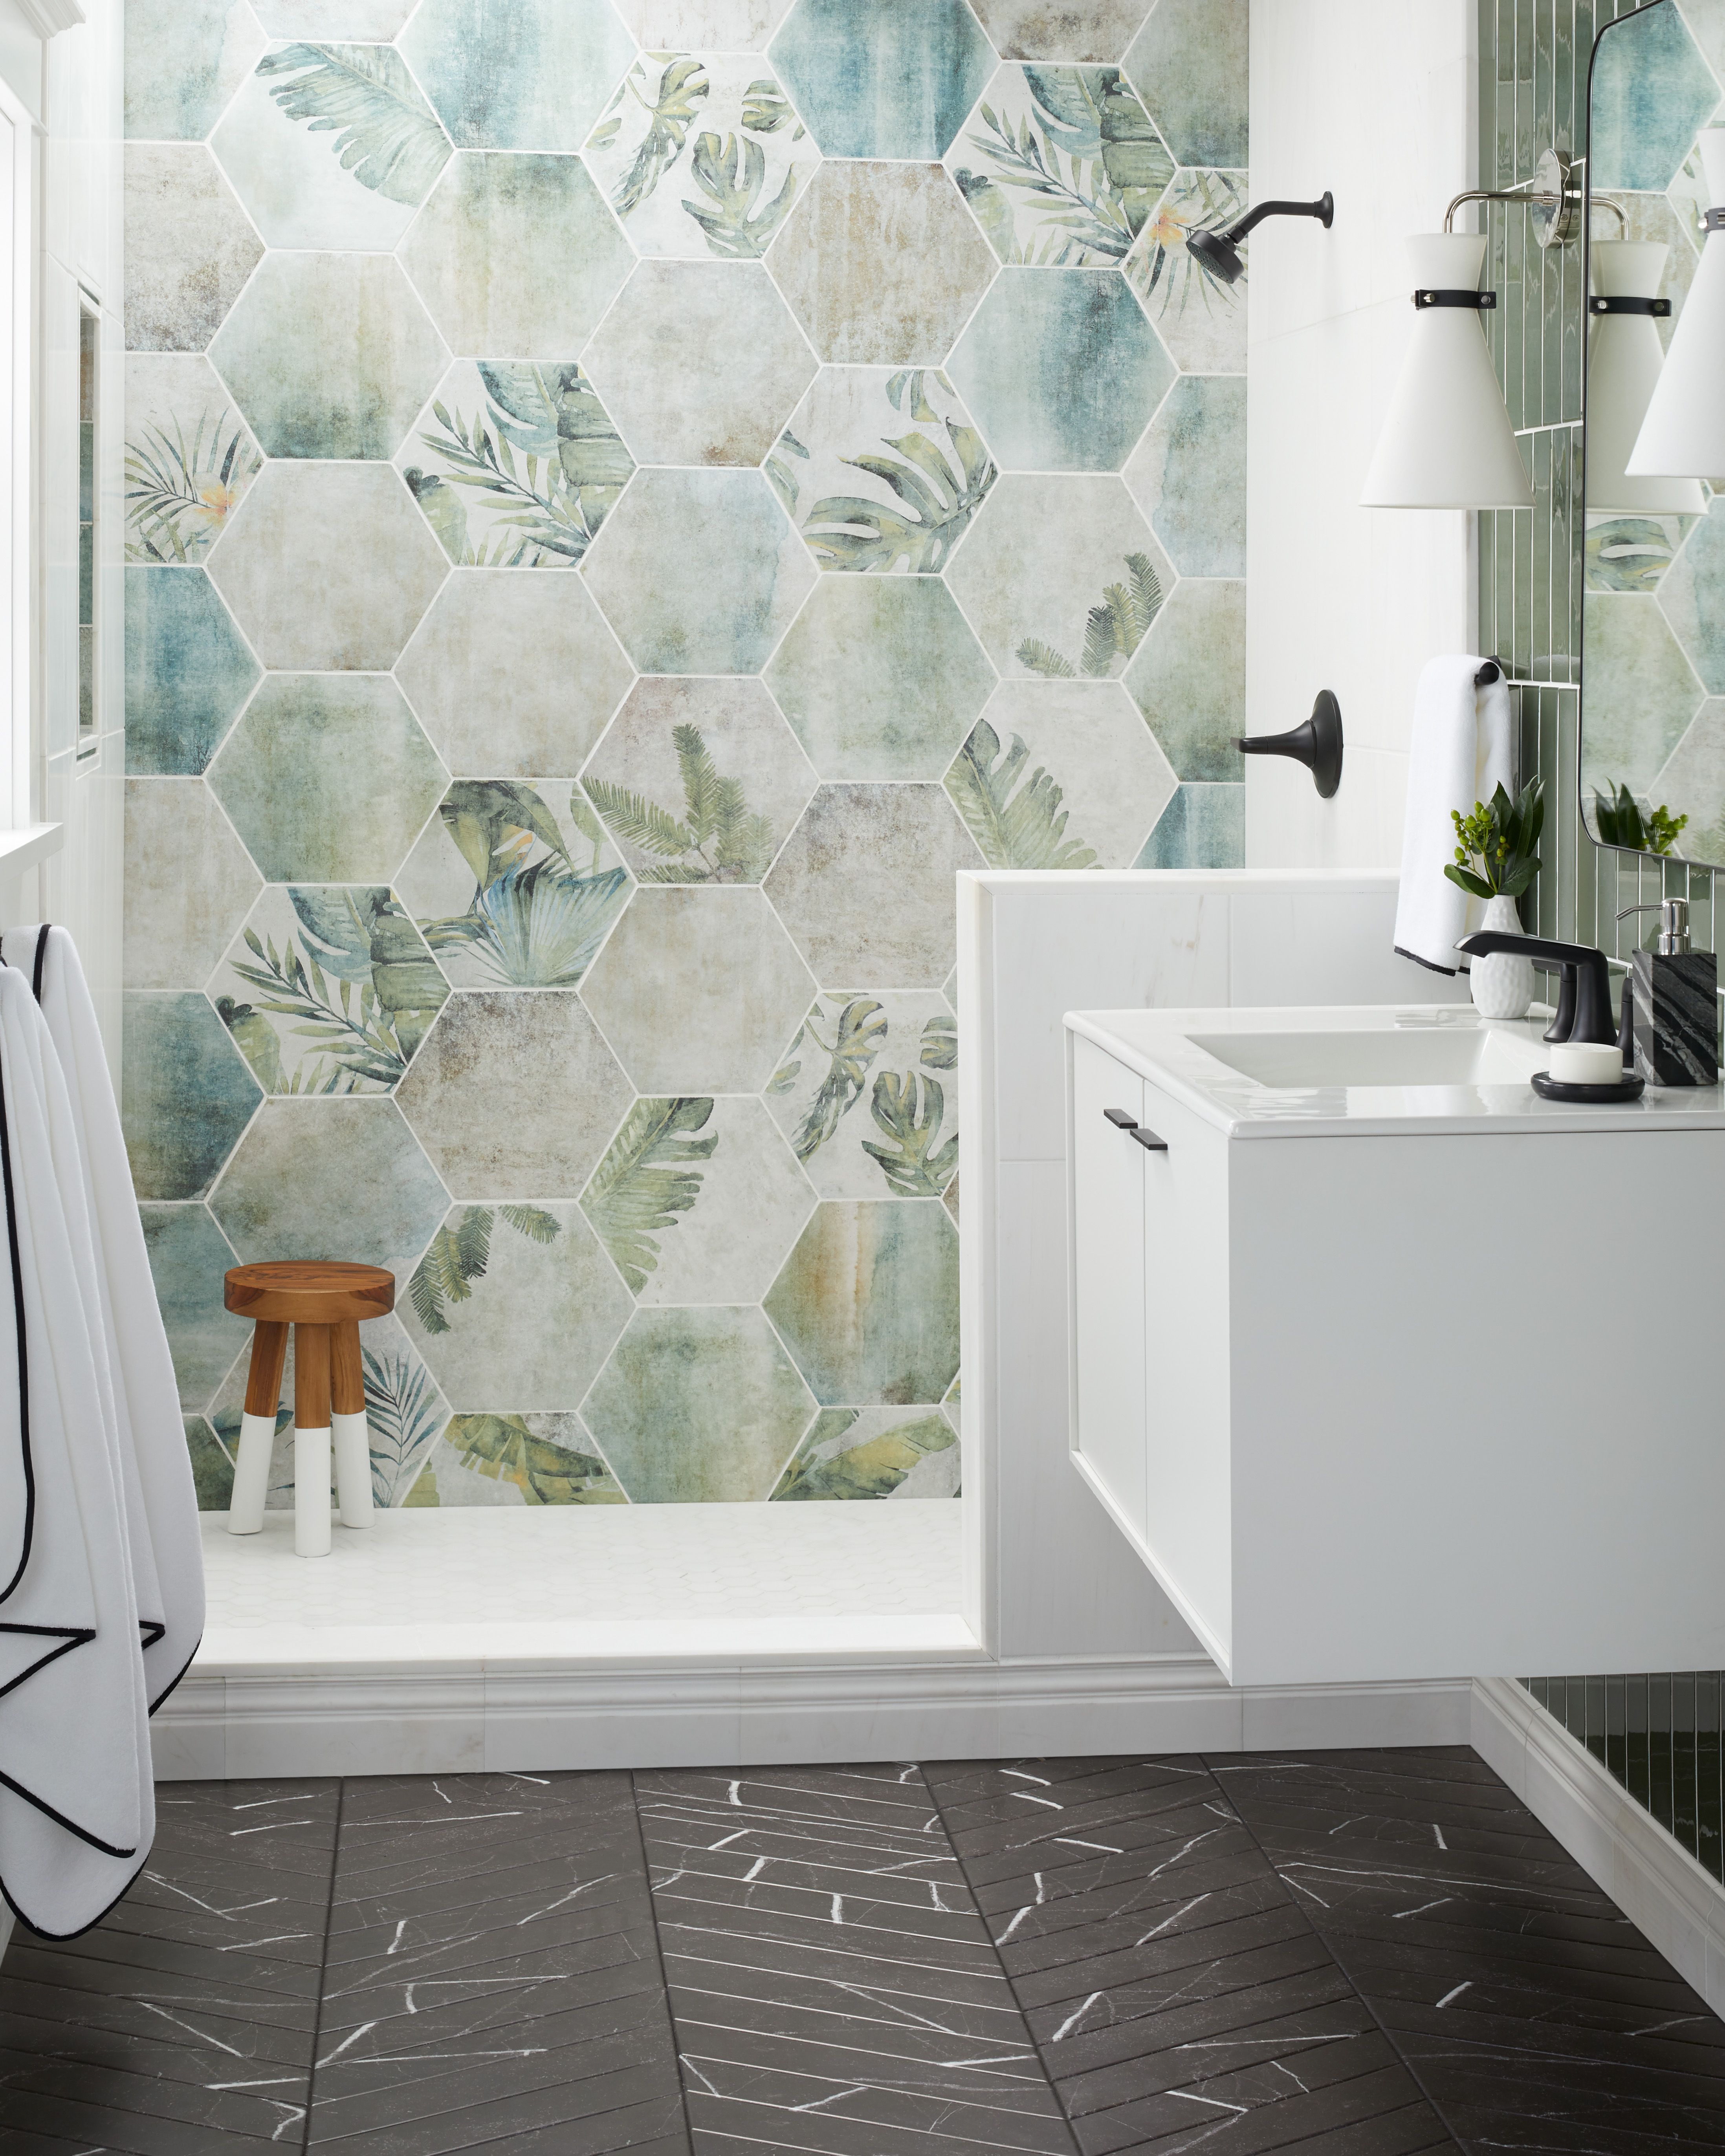 6 Elegant Tile Trends to Inspire a Home Refresh